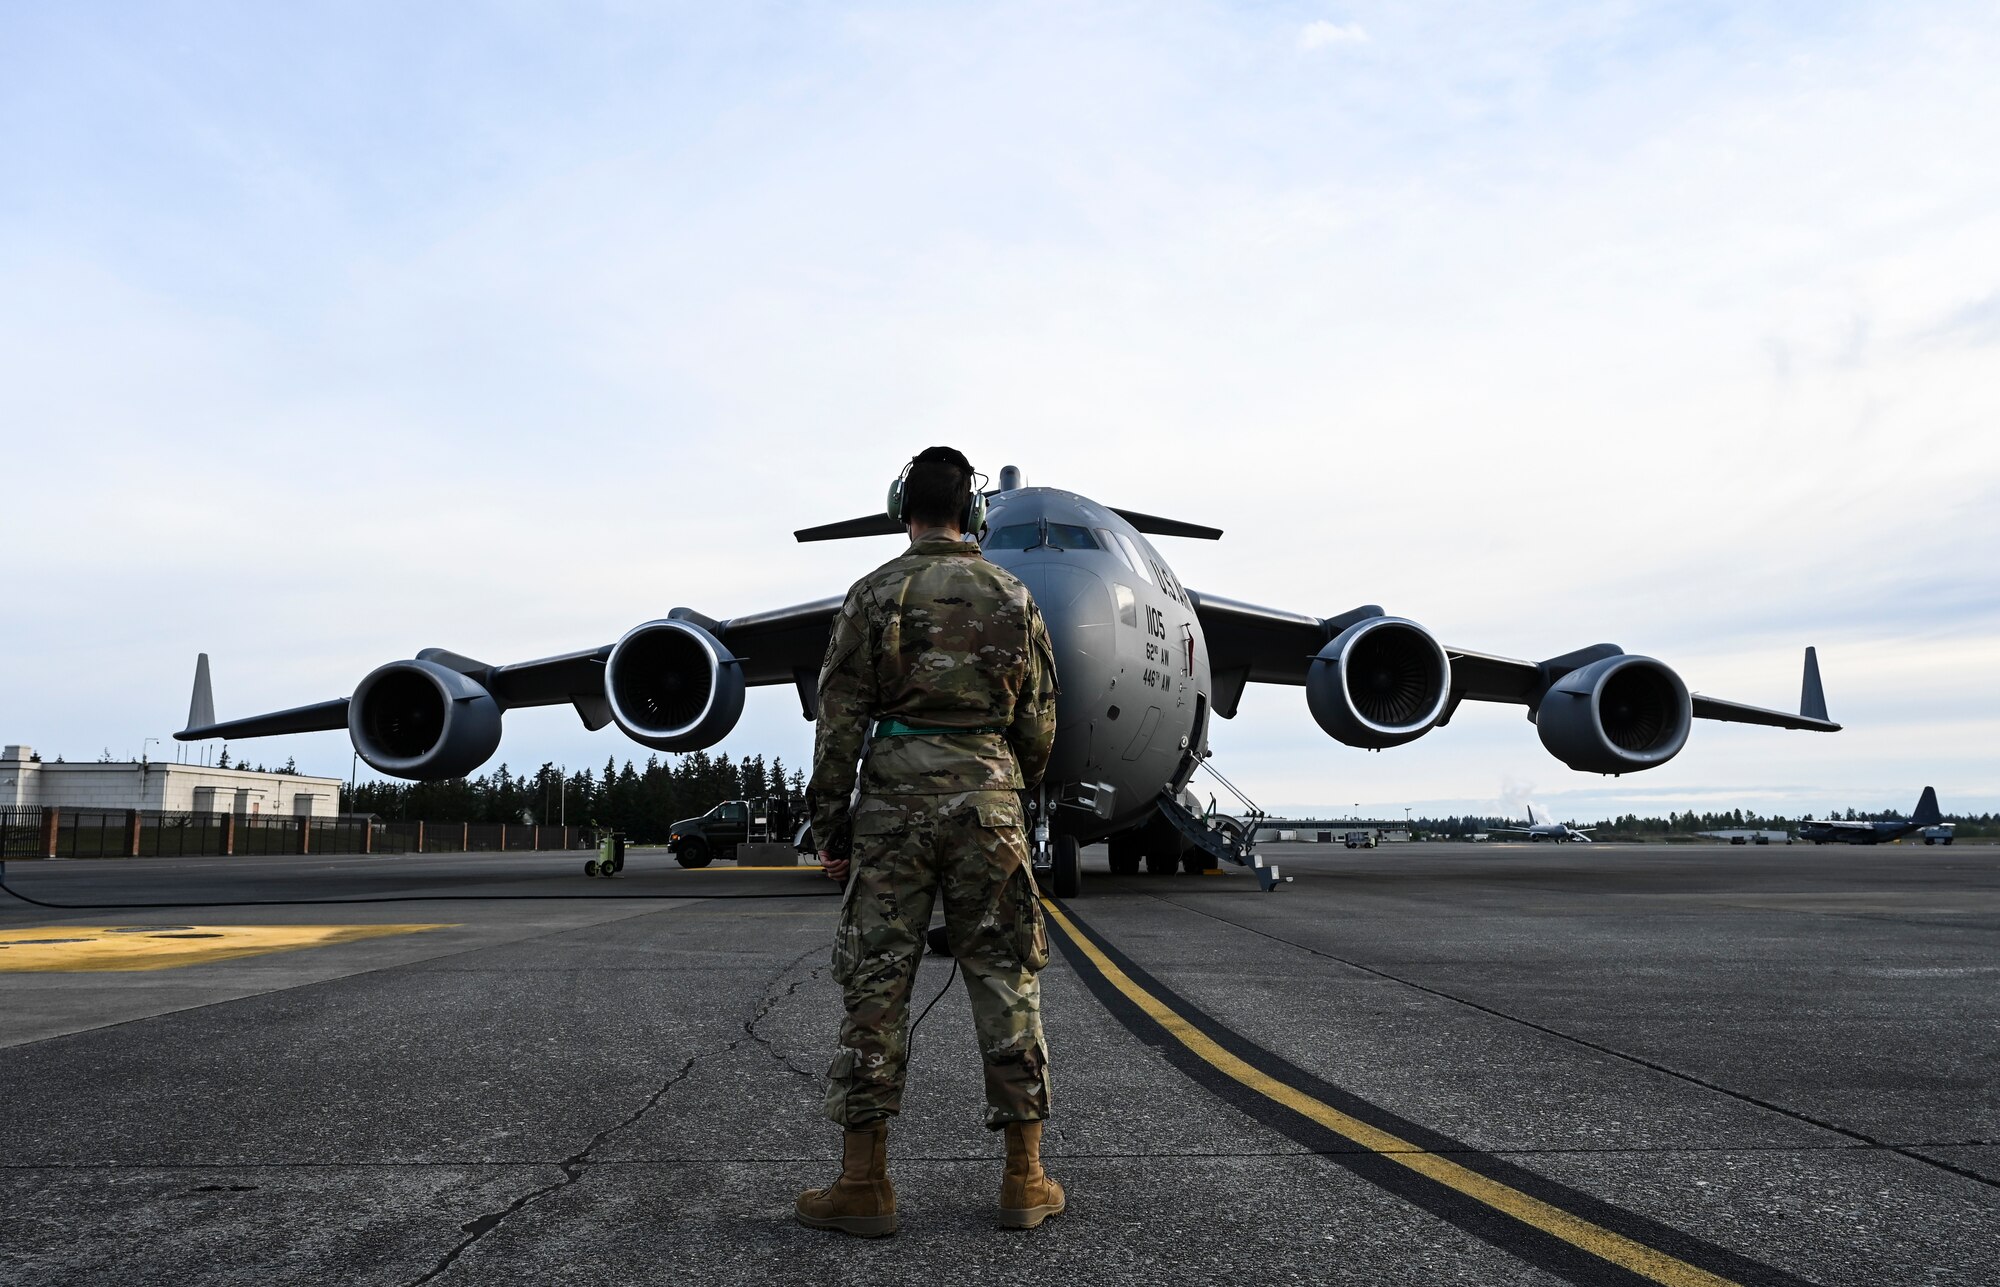 U.S. Air Force Senior Airman Gustavo Burciaga, 62nd Aircraft Maintenance Squadron crew chief, communicates with the pilots on a C-17 Globemaster III in preparation for an airlift mission as part of Exercise Rainier War at Joint Base Lewis-McChord, Washington, April 28, 2021. Rainier War tests the 62nd Airlift Wing's capability to plan, generate and execute a deployment tasking, sustain contingency operations, demonstrate full spectrum readiness while executing agile combat employment in a contested, degraded and operationally limited environment. (U.S. Air Force photo by Master Sgt. Julius Delos Reyes)